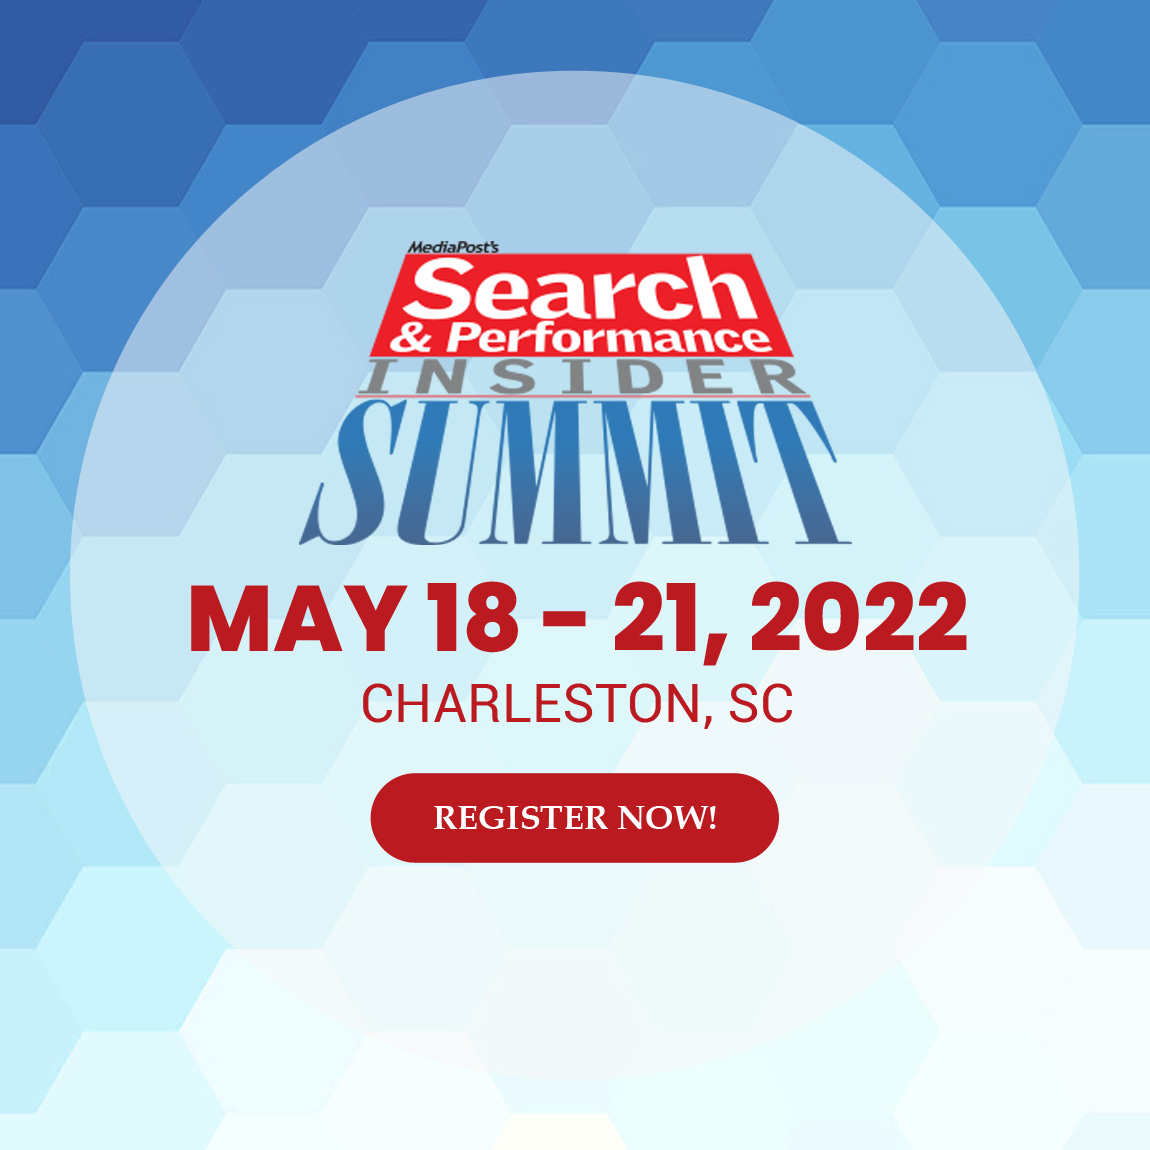 MediaPost’s Search Insider Summit